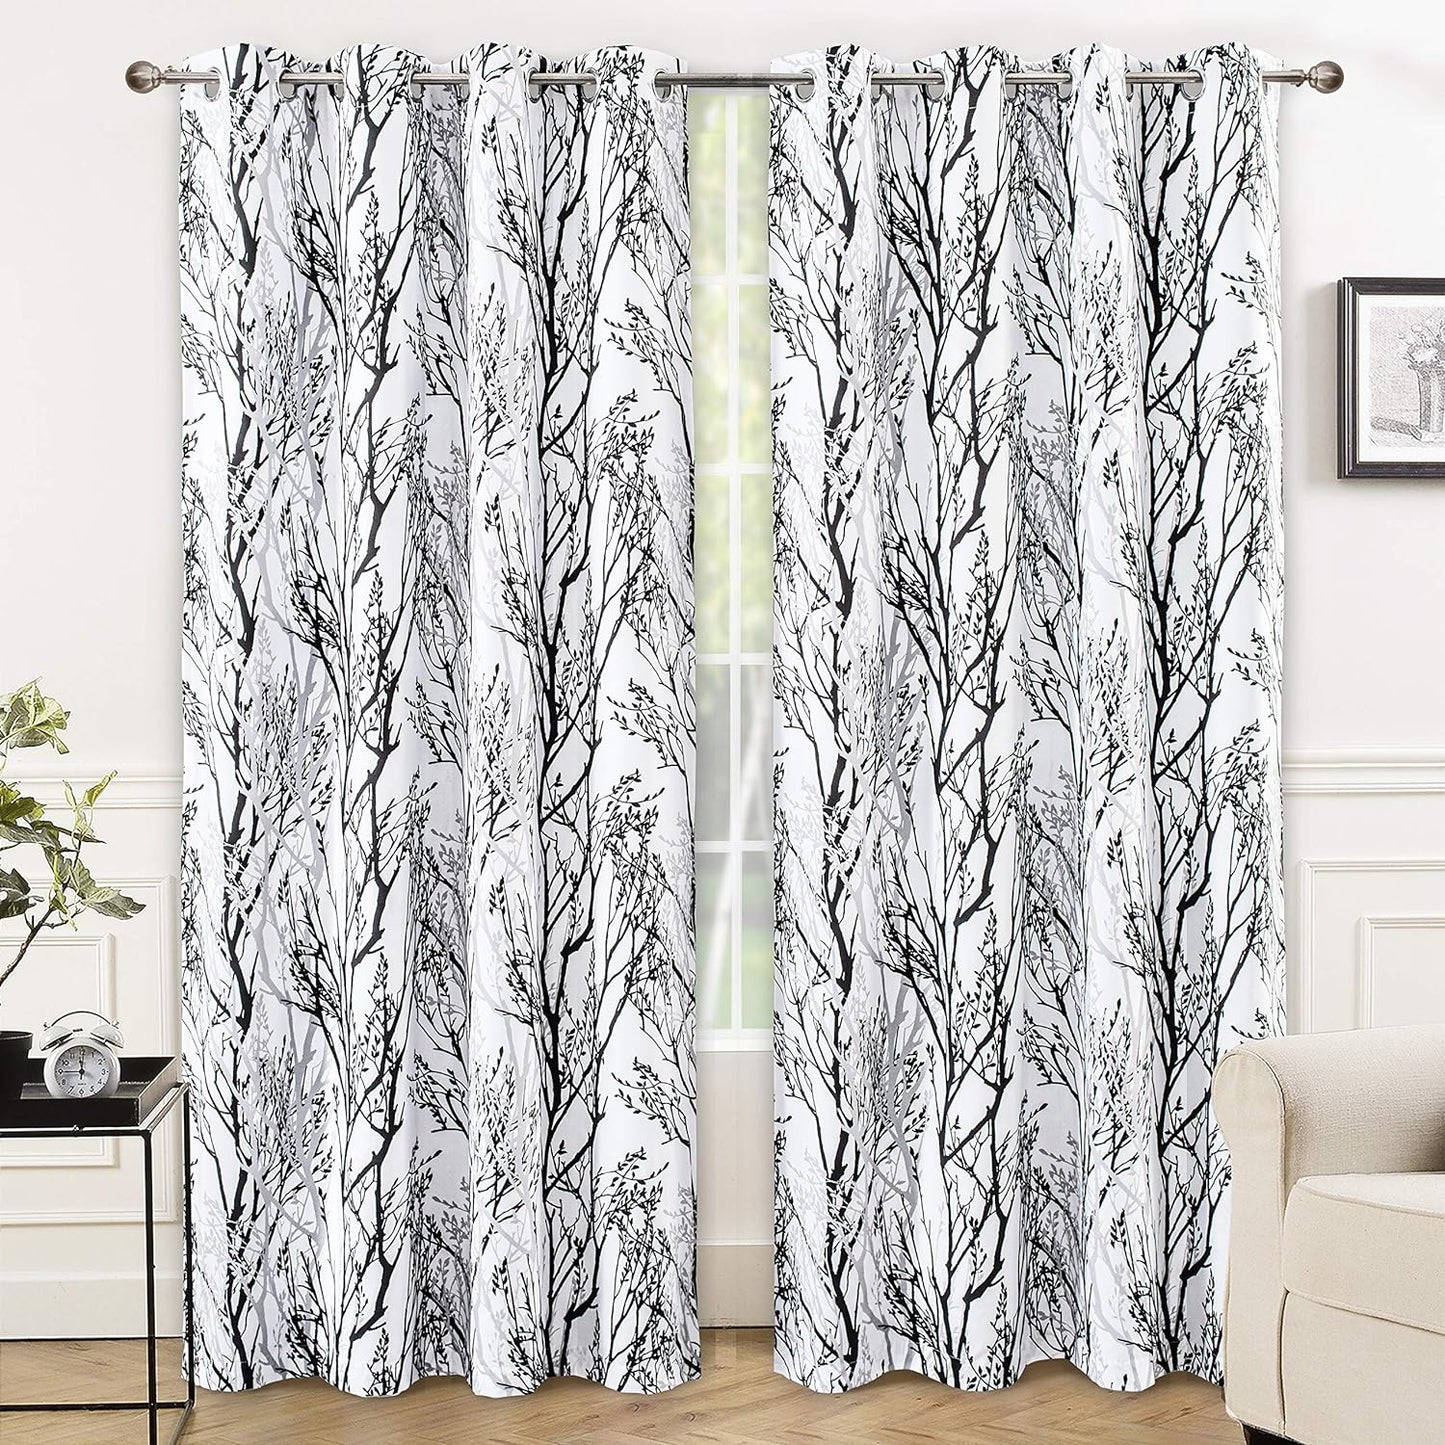 Driftaway Gray White Tree Branch Blackout Curtains for Bedroom Curtains 84 Inch Length 2 Panels Set Grey Branch Lined Window Treatment Thermal Grommet Top Curtain for Living Room Winter Warm Curtain  DriftAway Tree Branch-Black White 52"X84" 